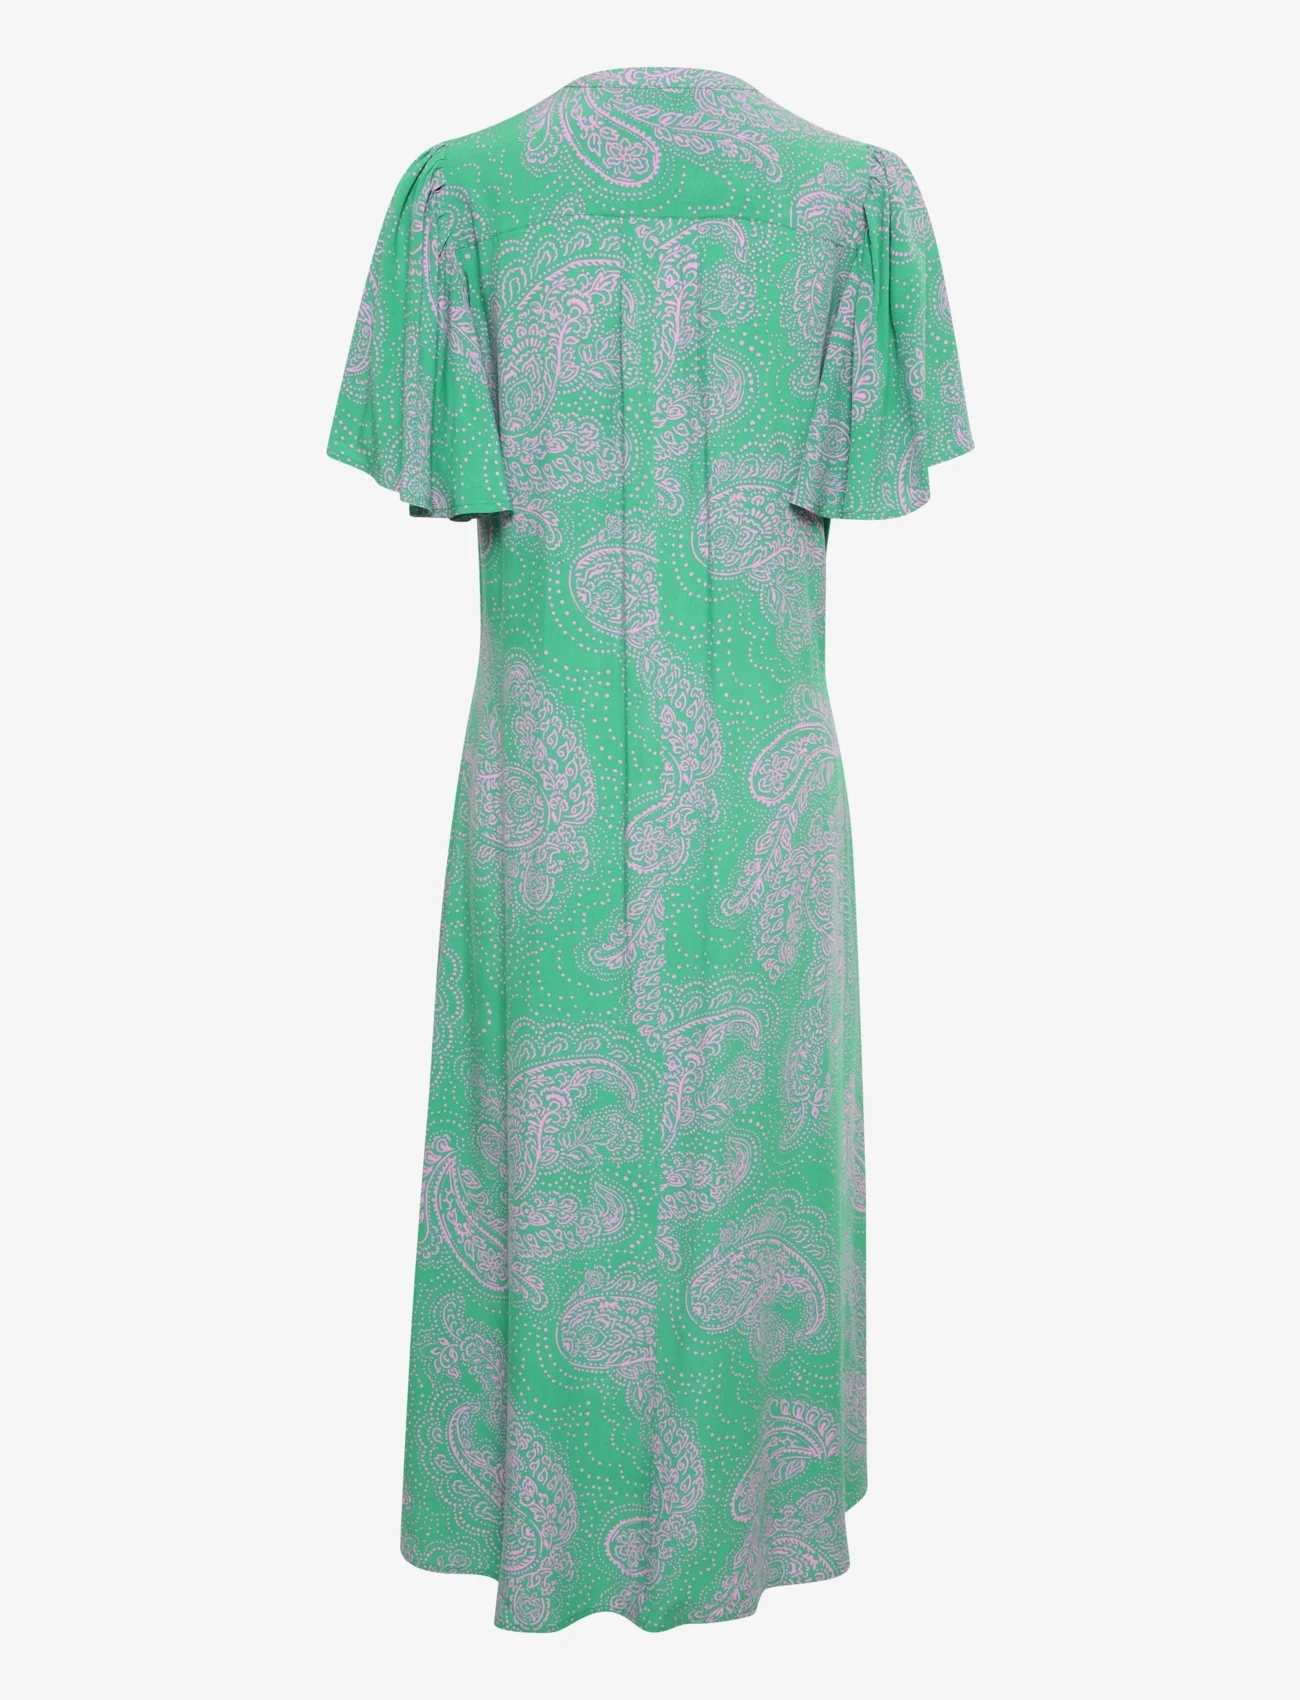 Culture - CUpolly Long Dress - suvekleidid - green/pink paisley - 1